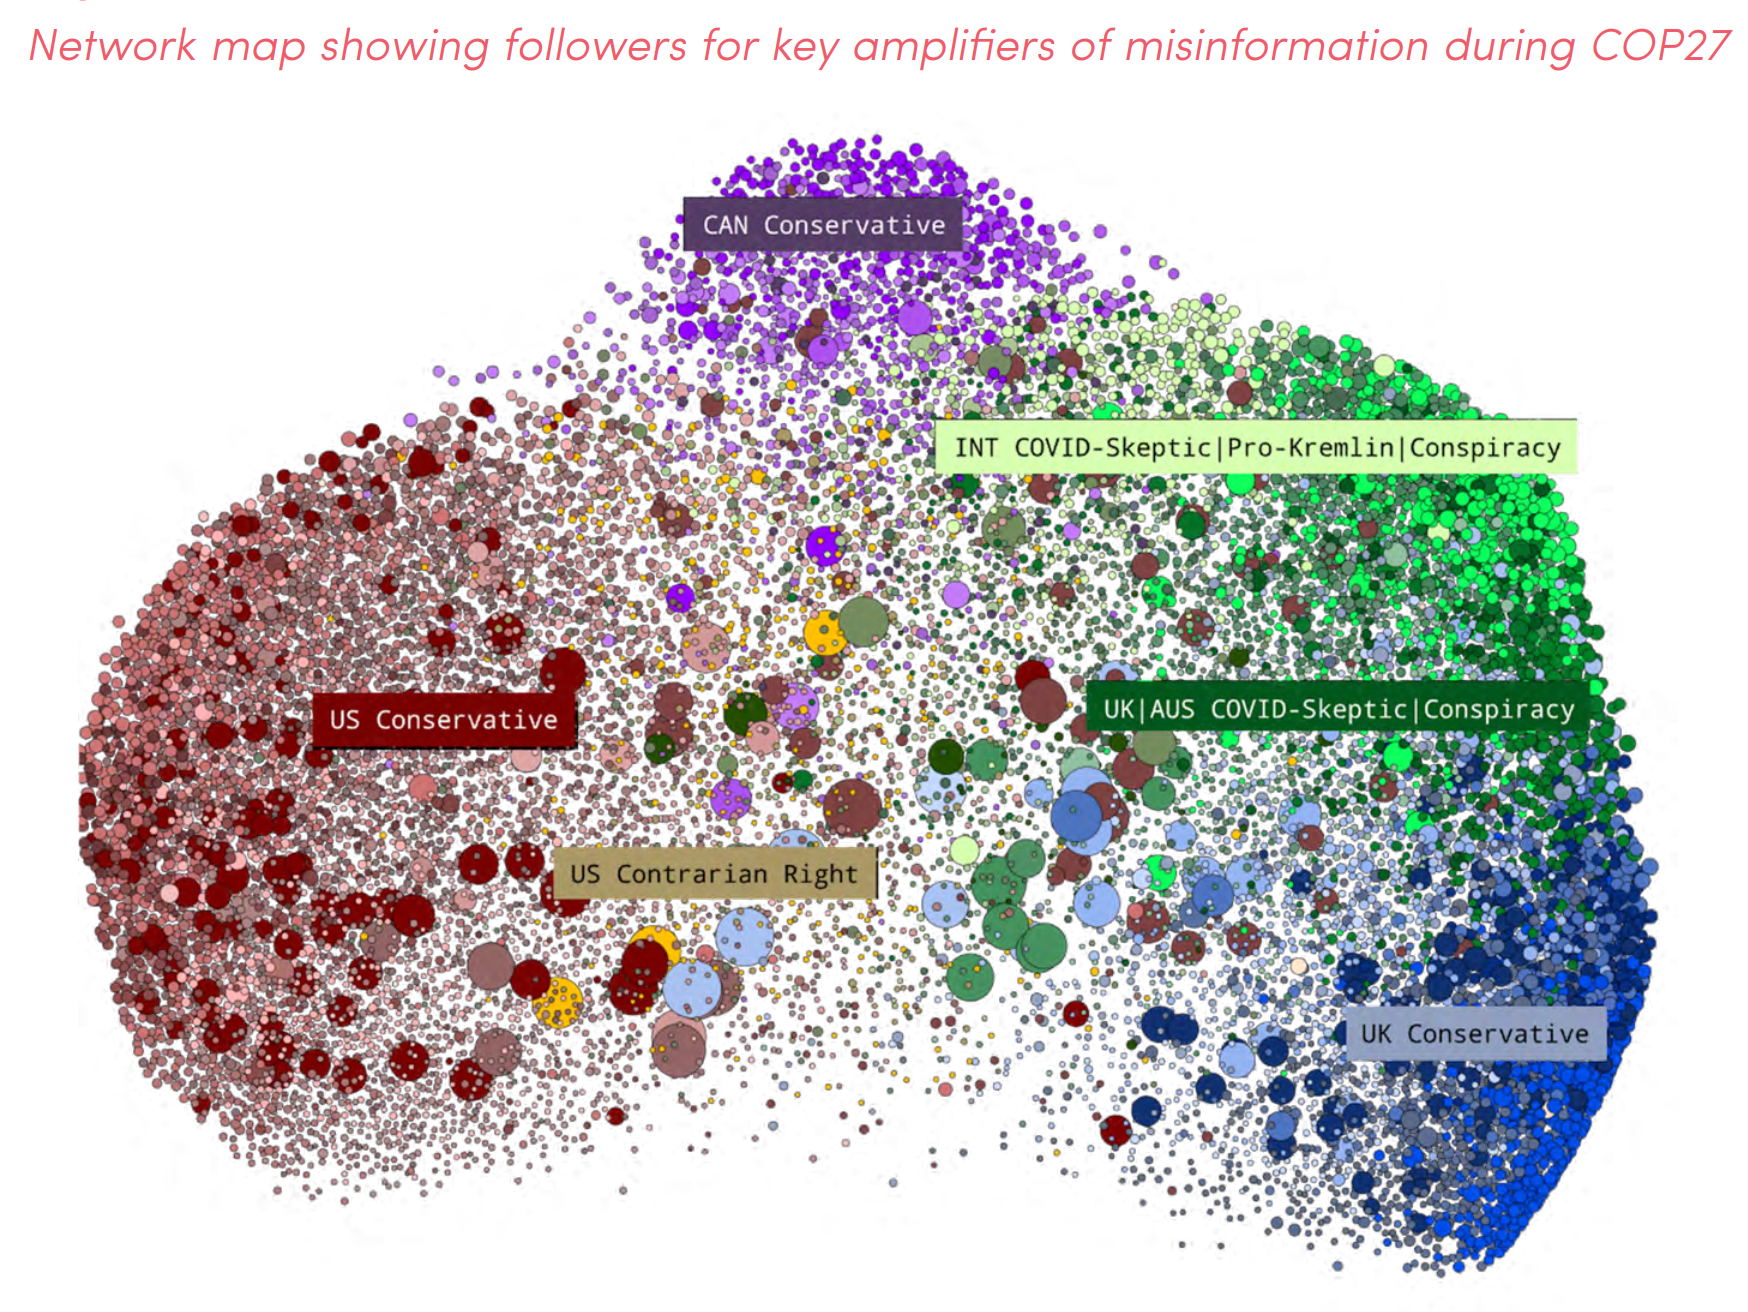 Network map showing followers for key amplifiers of climate disinformation during COP27, grouped by common traits or identifying factors. Network mapping around COP26 showed that, among accounts following key climate misinformers on Twitter, 7.5 percent were primarily focused on climate - for COP27 the cluster constitutes a mere 0.33 percent. The shift reveals how right-wing ‘culture war’ influencers are becoming the most prominent voices in spreading climate misinformation. Such content drives an ecosystem in which environmental issues, including COP summits, can more easily be framed and amplified as a polarising topic - a trend covered in depth by a recent peer-reviewed paper in Nature Climate Change. Overall, the audience for key misinformation influencers has a similar composition to last year’s COP26 network. Accounts in the ‘U.S. Conservative’ cluster comprise the largest portion of the map, including highly influential pundits like Dinesh D’Souza (2.9m followers) and Tom Fitton (1.9m followers) alongside elected officials like House Rep. Lauren Boebert (2m followers) who focus on broadly right-wing “culture war” issues. Taken together, the US, UK, and Canada Conservative clusters make up 72.25 percent of the overall network. While climate issues do not dominate their content strategy, these accounts do share related misinformation during key climate-related events, including COP, or as part of wider outputs. Climate content regularly features alongside other misleading, disproven and/or unsubstantiated claims on an array of topics, including around electoral fraud, vaccinations, the COVID-19 pandemic, migration, and child trafficking rings run by so-called ‘elites’ Graphic: Climate Action Against Disinformation / Graphika